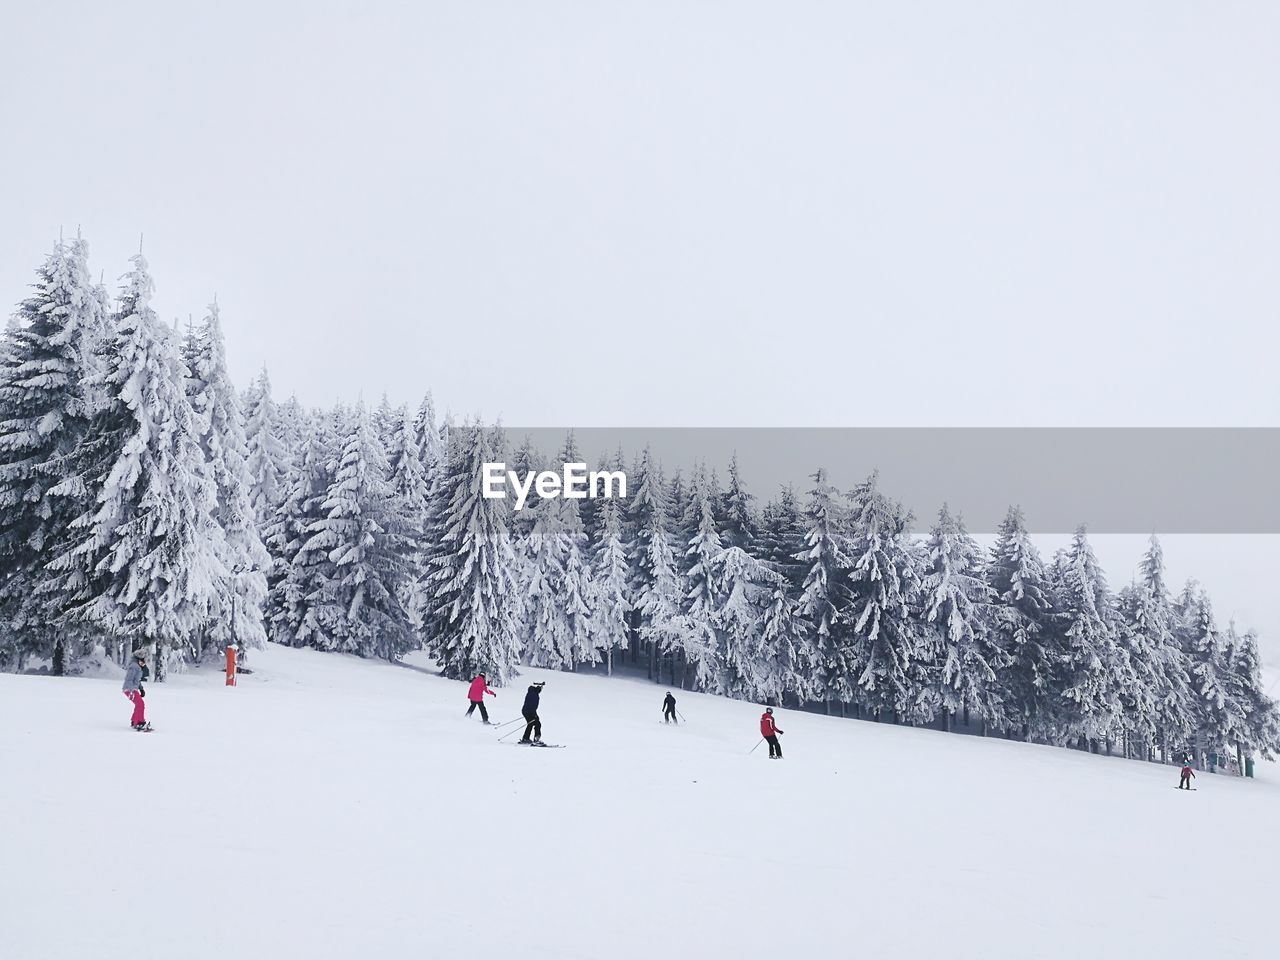 People on snow covered landscape against sky